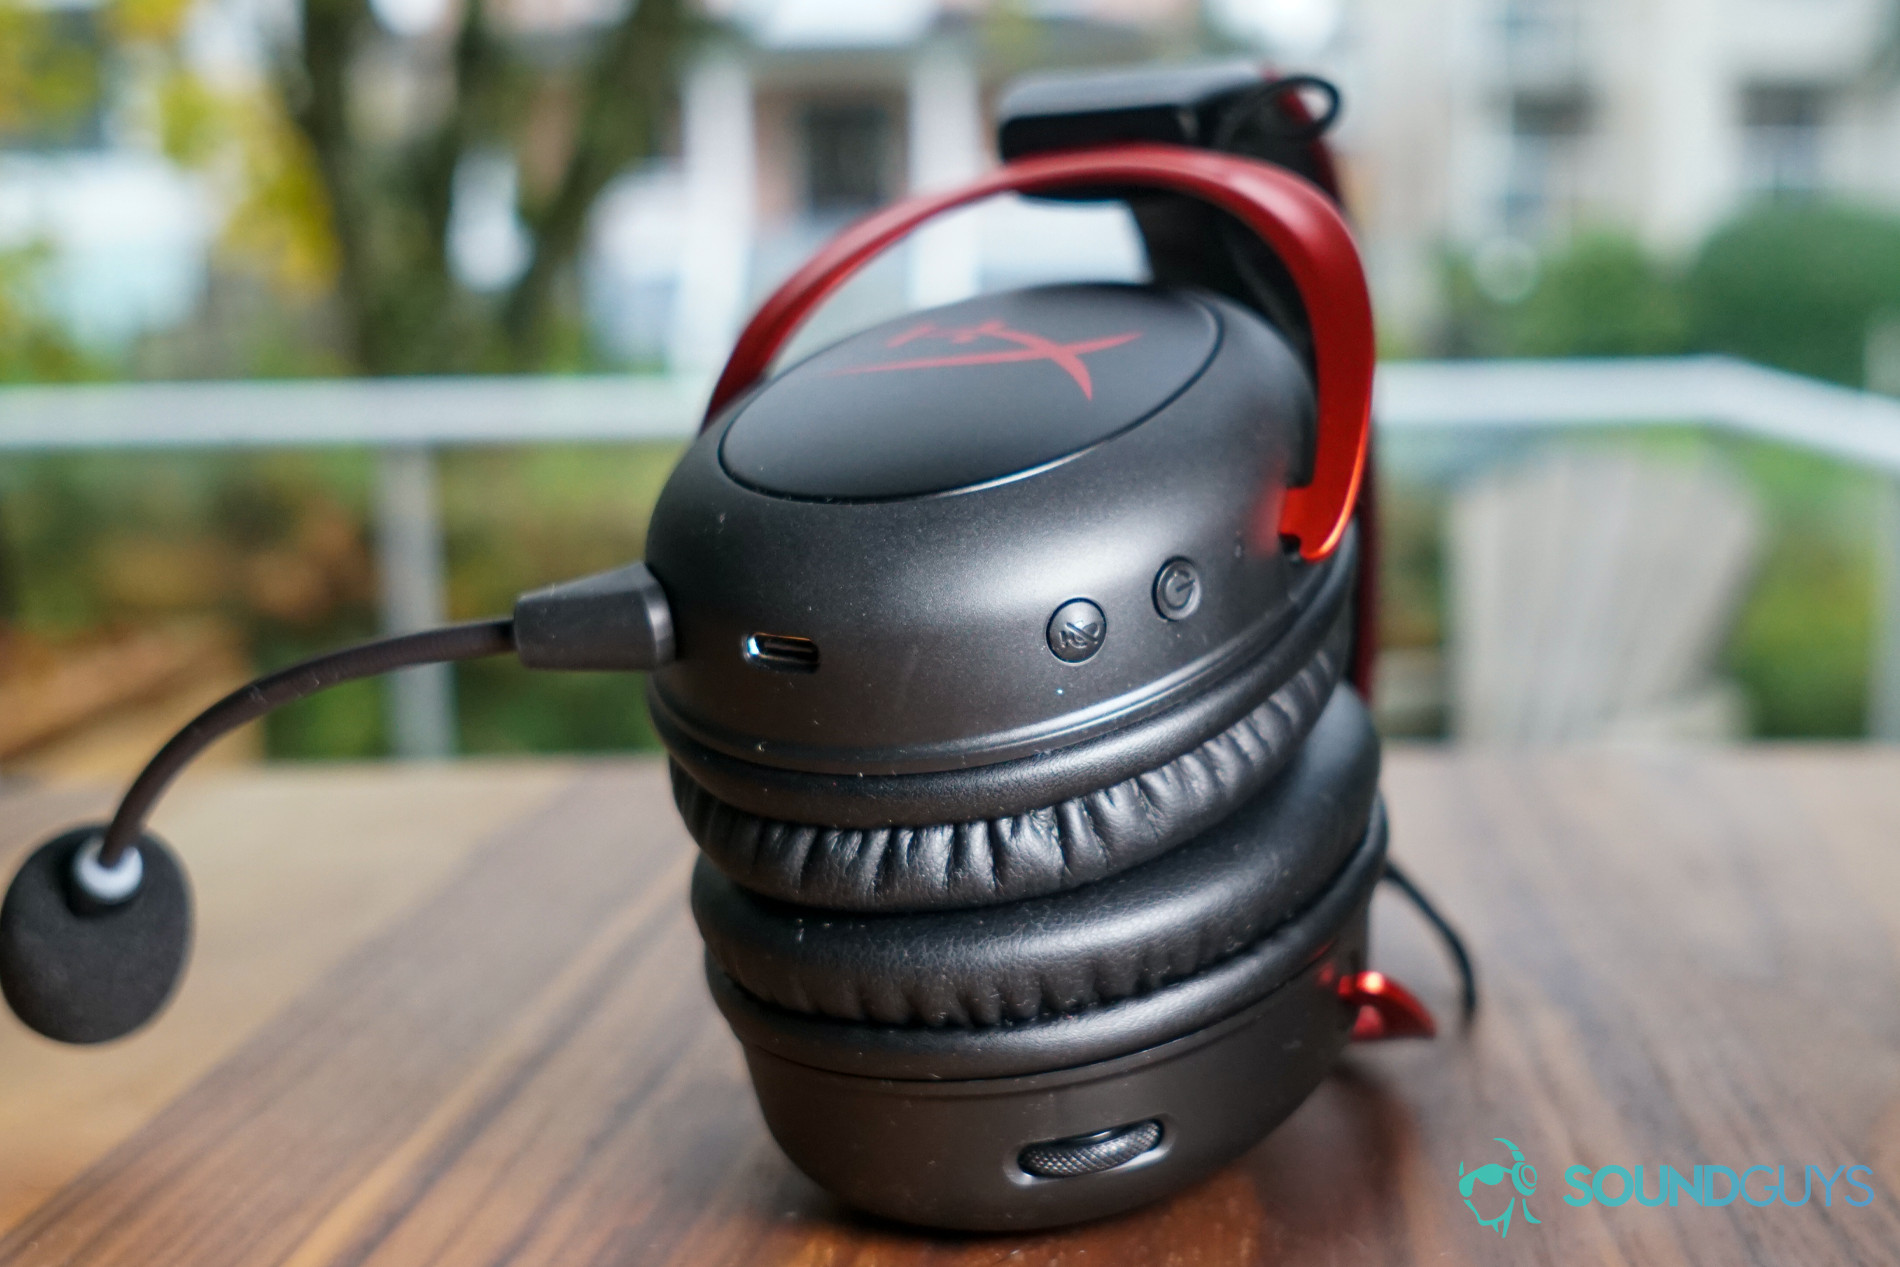 The HyperX Cloud II Wireless gaming headset lays on its side by a window, showing its buttons and charging port.